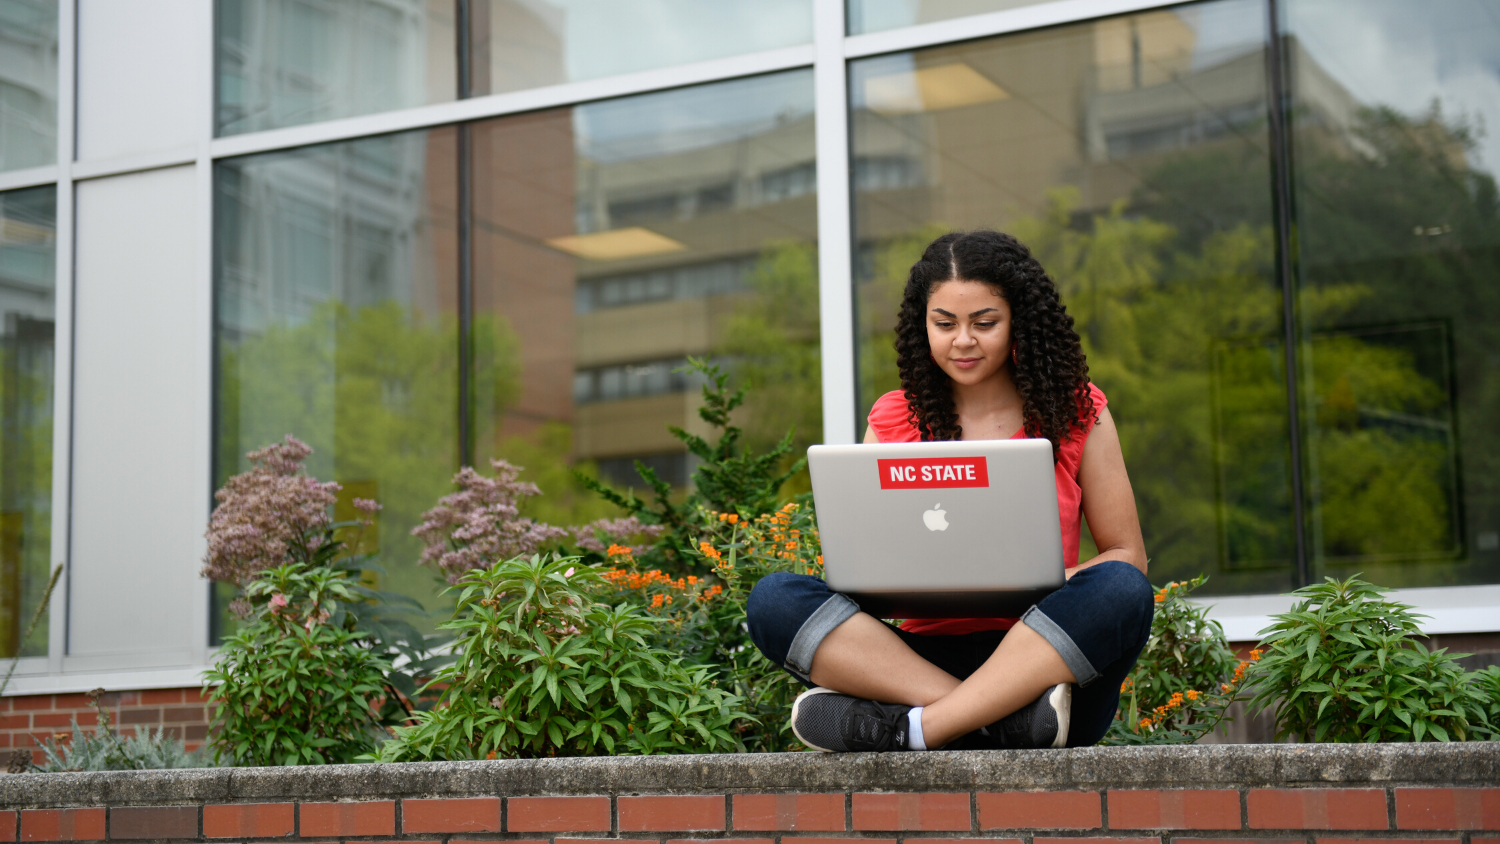 Young woman sitting on a brick ledge with a laptop in front of large windows and greenery.